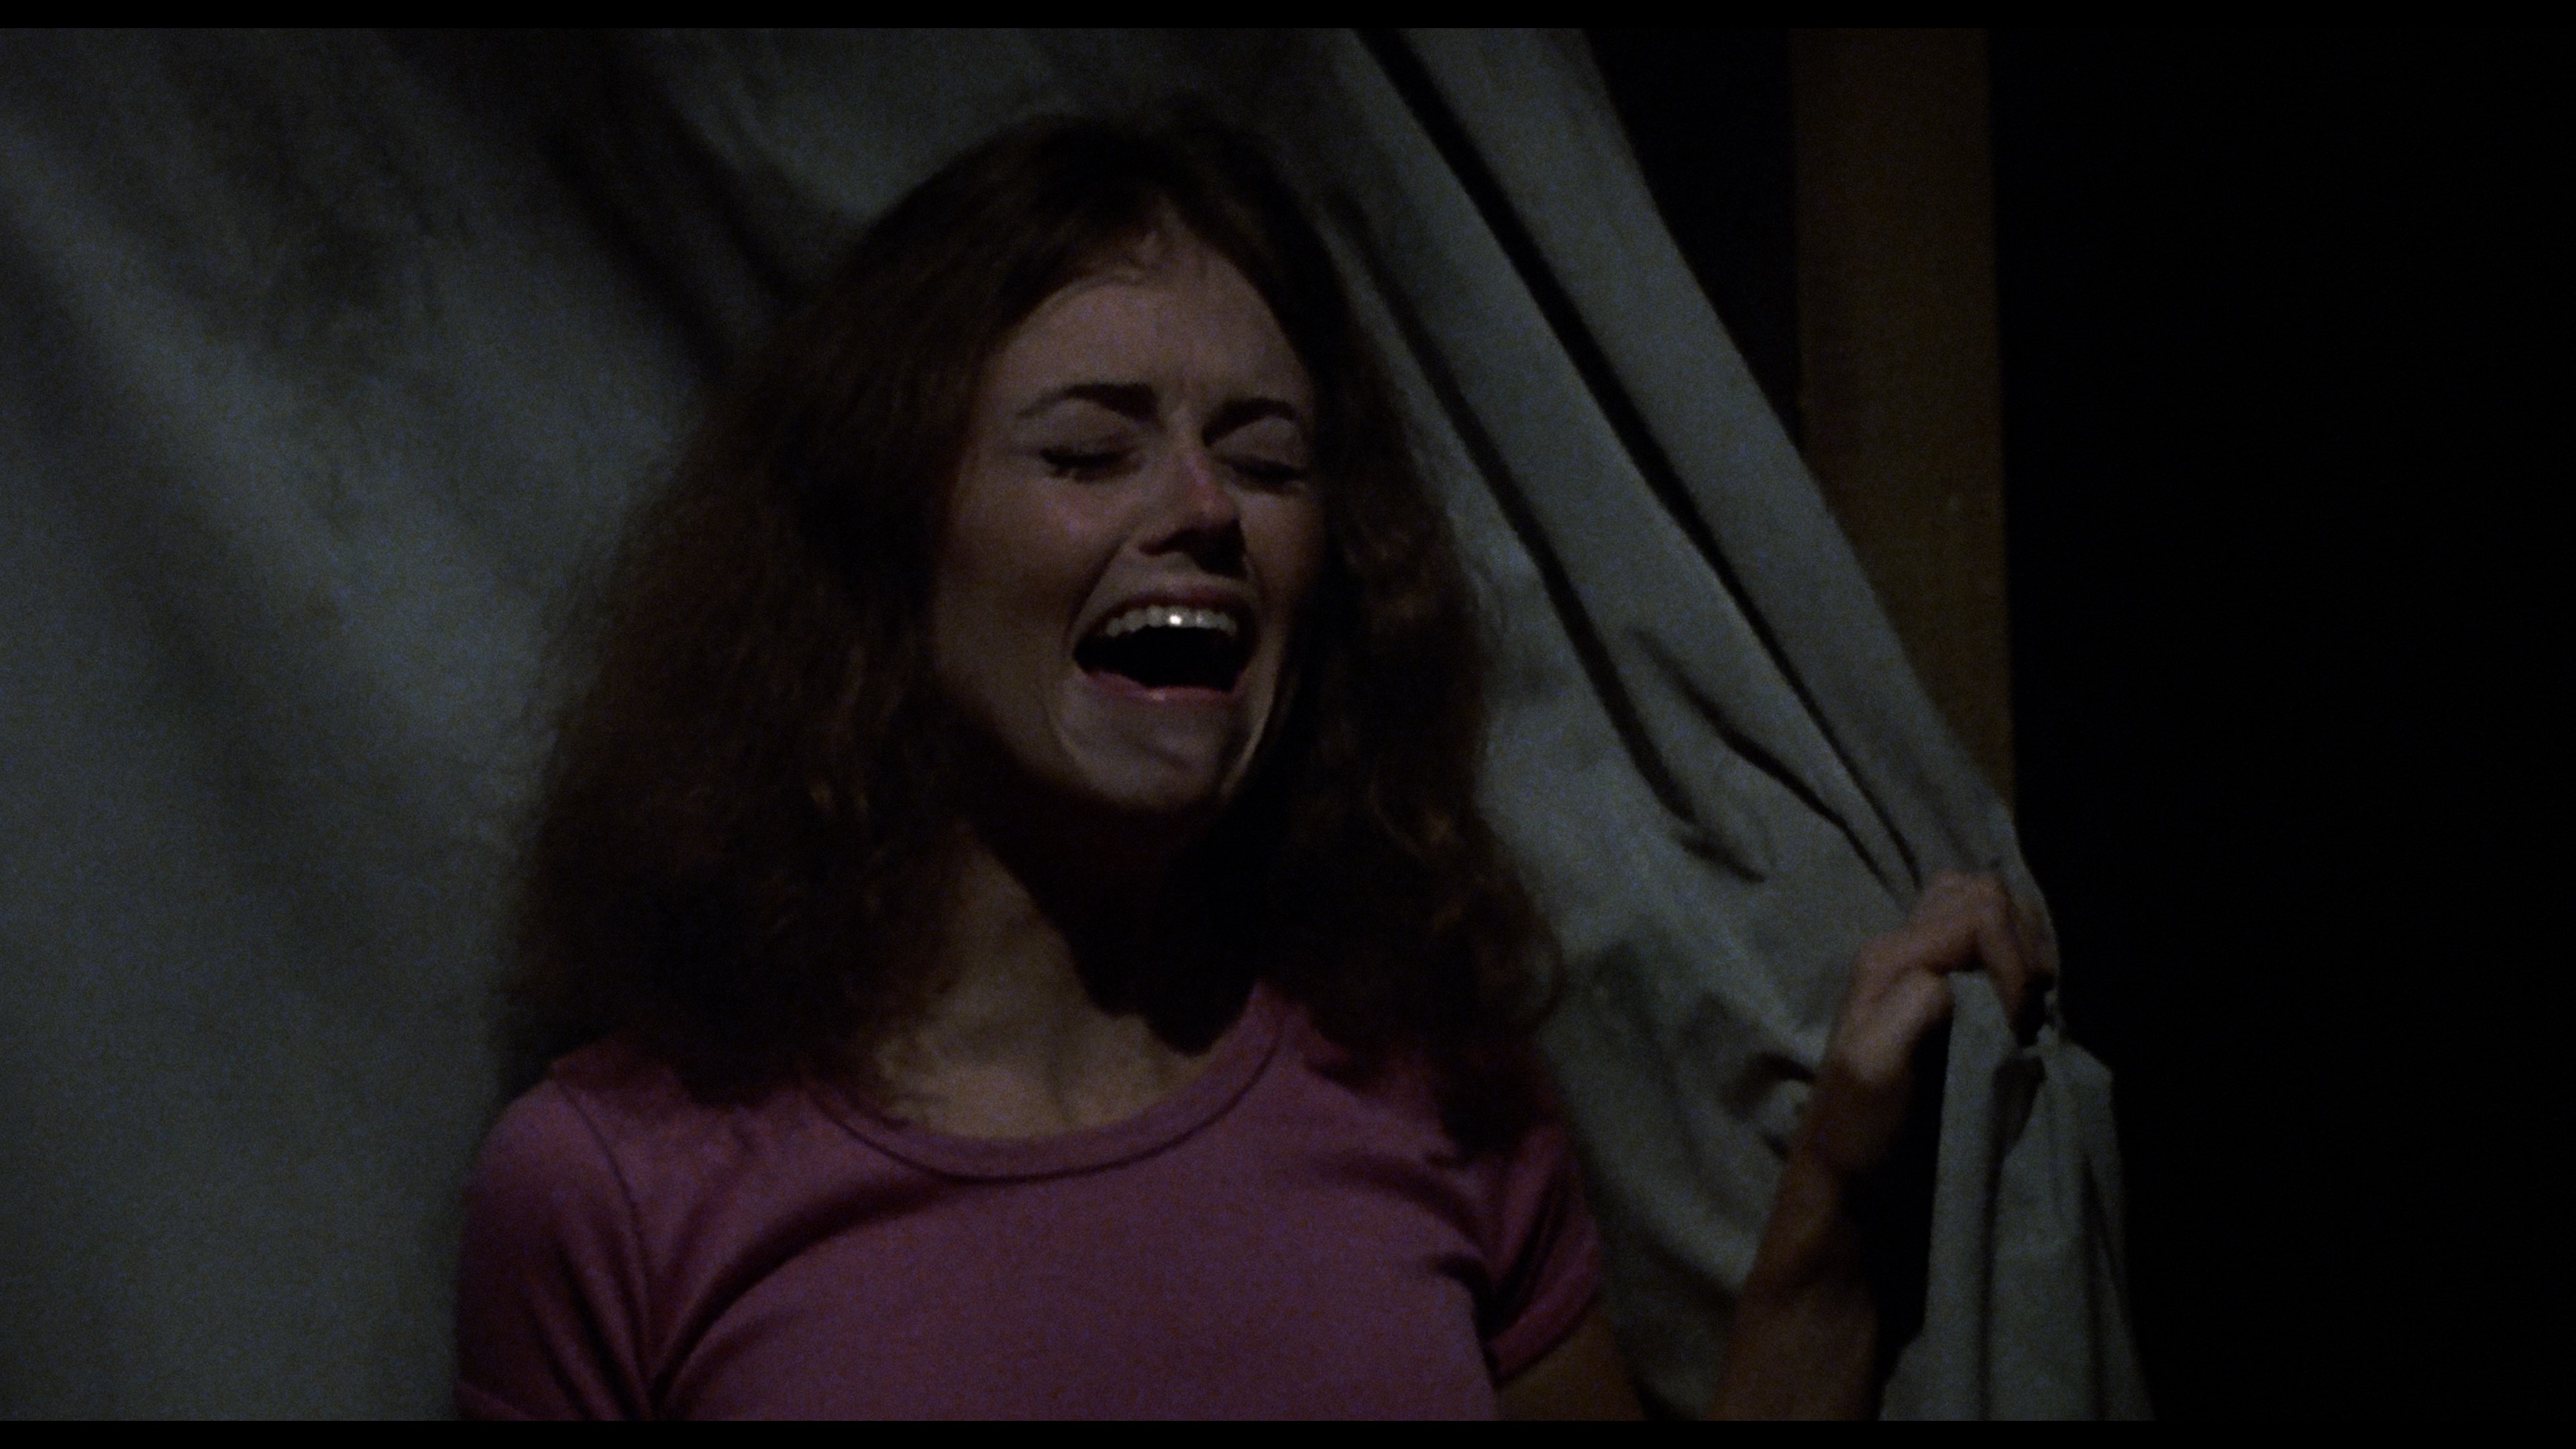 BloodGuts UK Horror  FRIDAY THE 13TH [1980] (REVIEW)